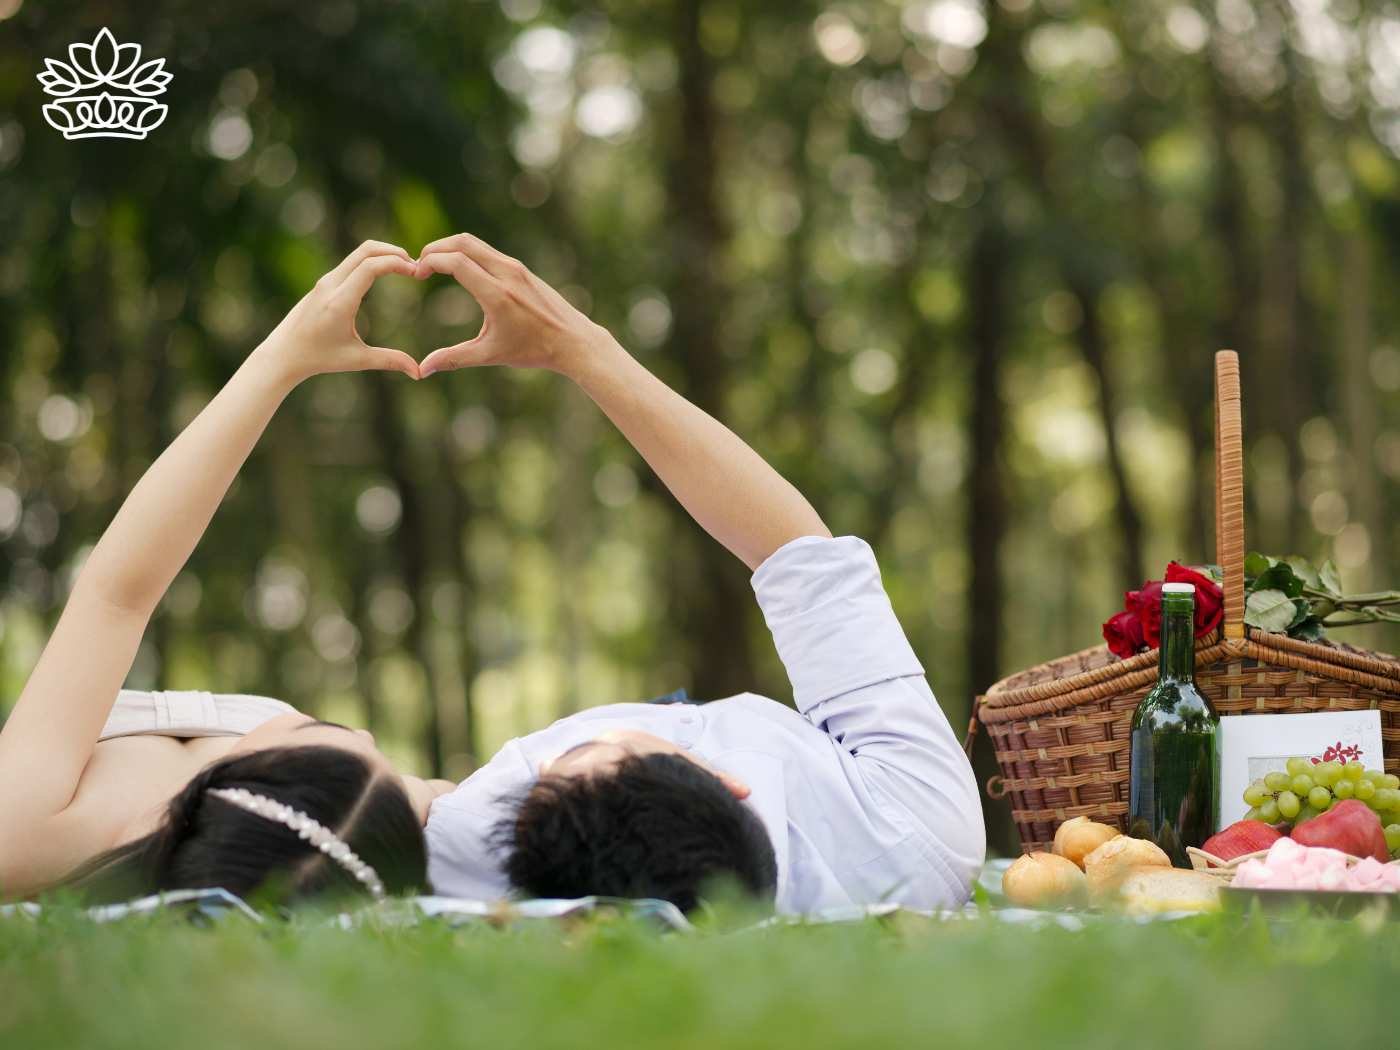 Couple forming a heart shape with their hands while lying on a picnic blanket in a lush park, with a picnic basket and romantic setup nearby, celebrating love in nature. Fabulous Flowers and Gifts. Delivered with Heart.